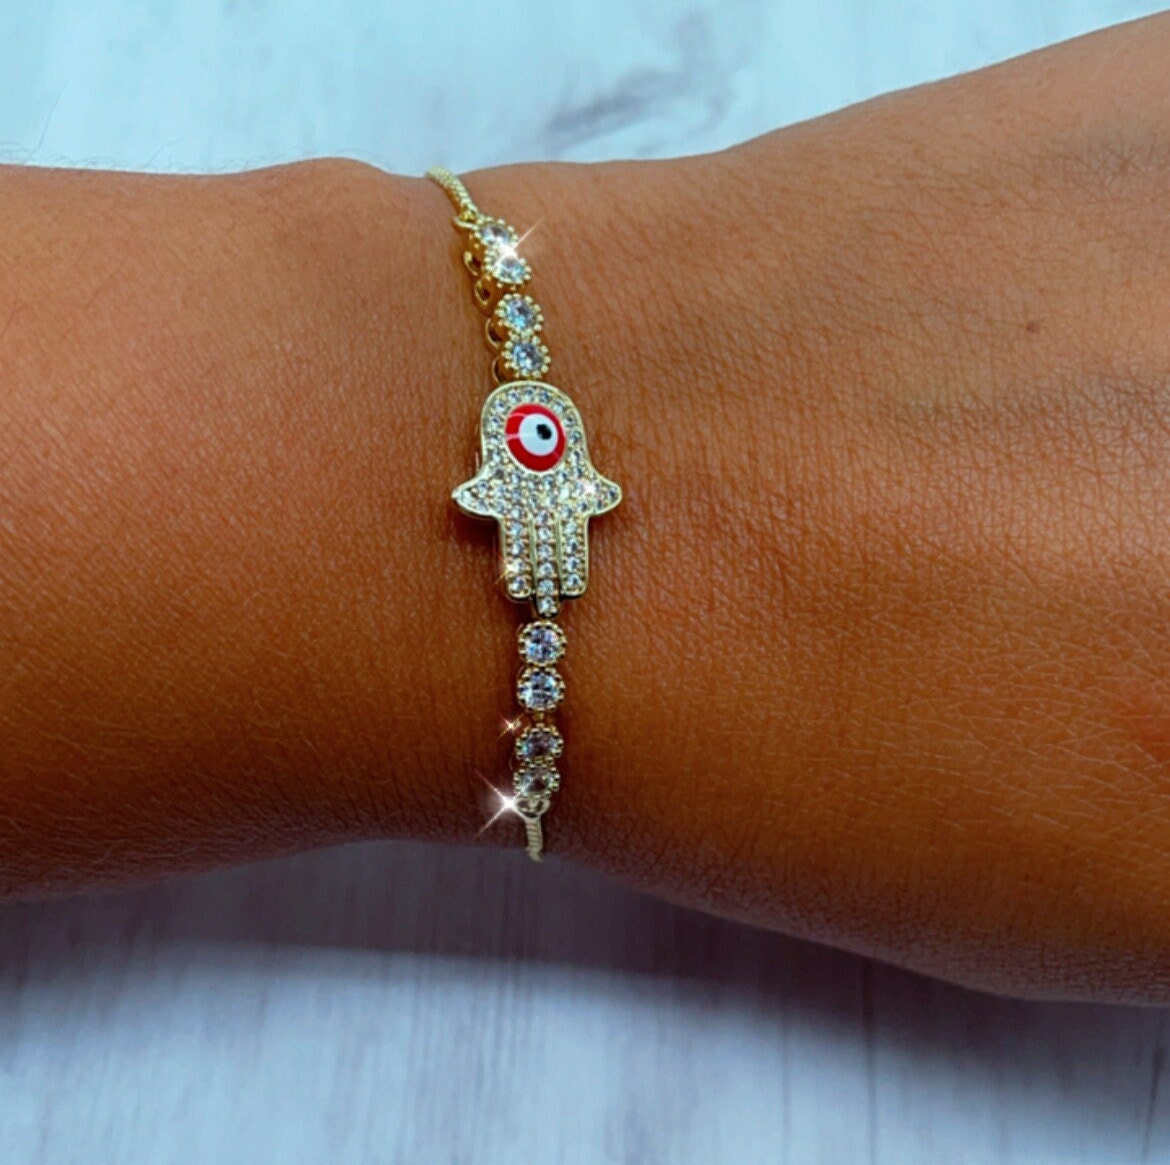 18k Gold Layered Cubic Zirconia Hamsa Adjustable Bracelet with Featuring Red or